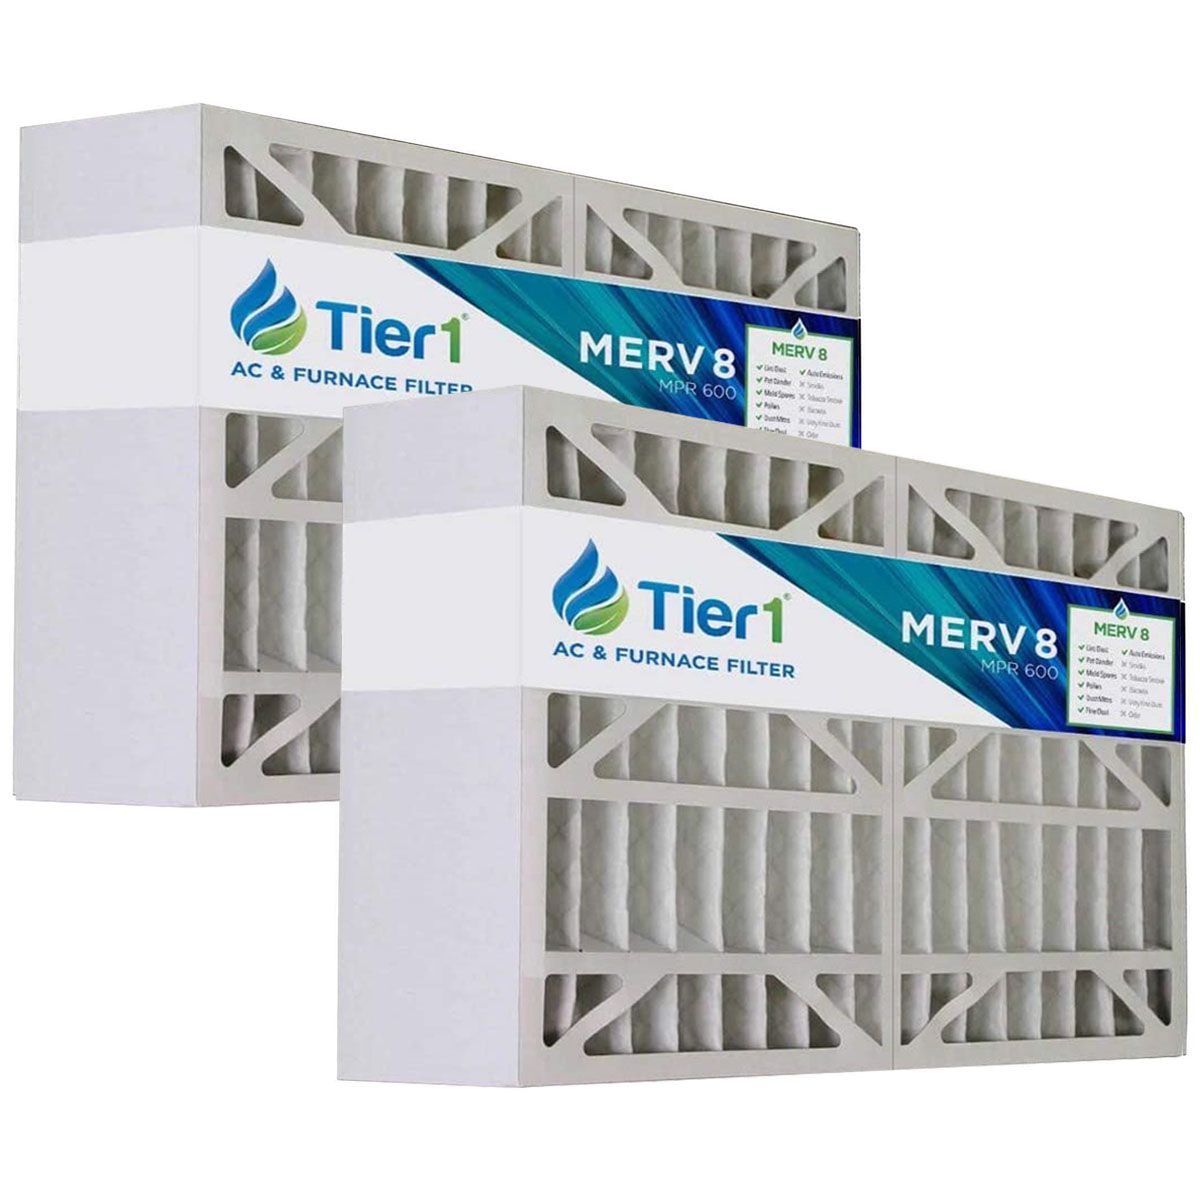 Tier1 16x28x6 Merv 8 Pleated AC Furnace Air Filter 2 Pack (Actual Size: 15 3/8 x 26 3/4 x 6)